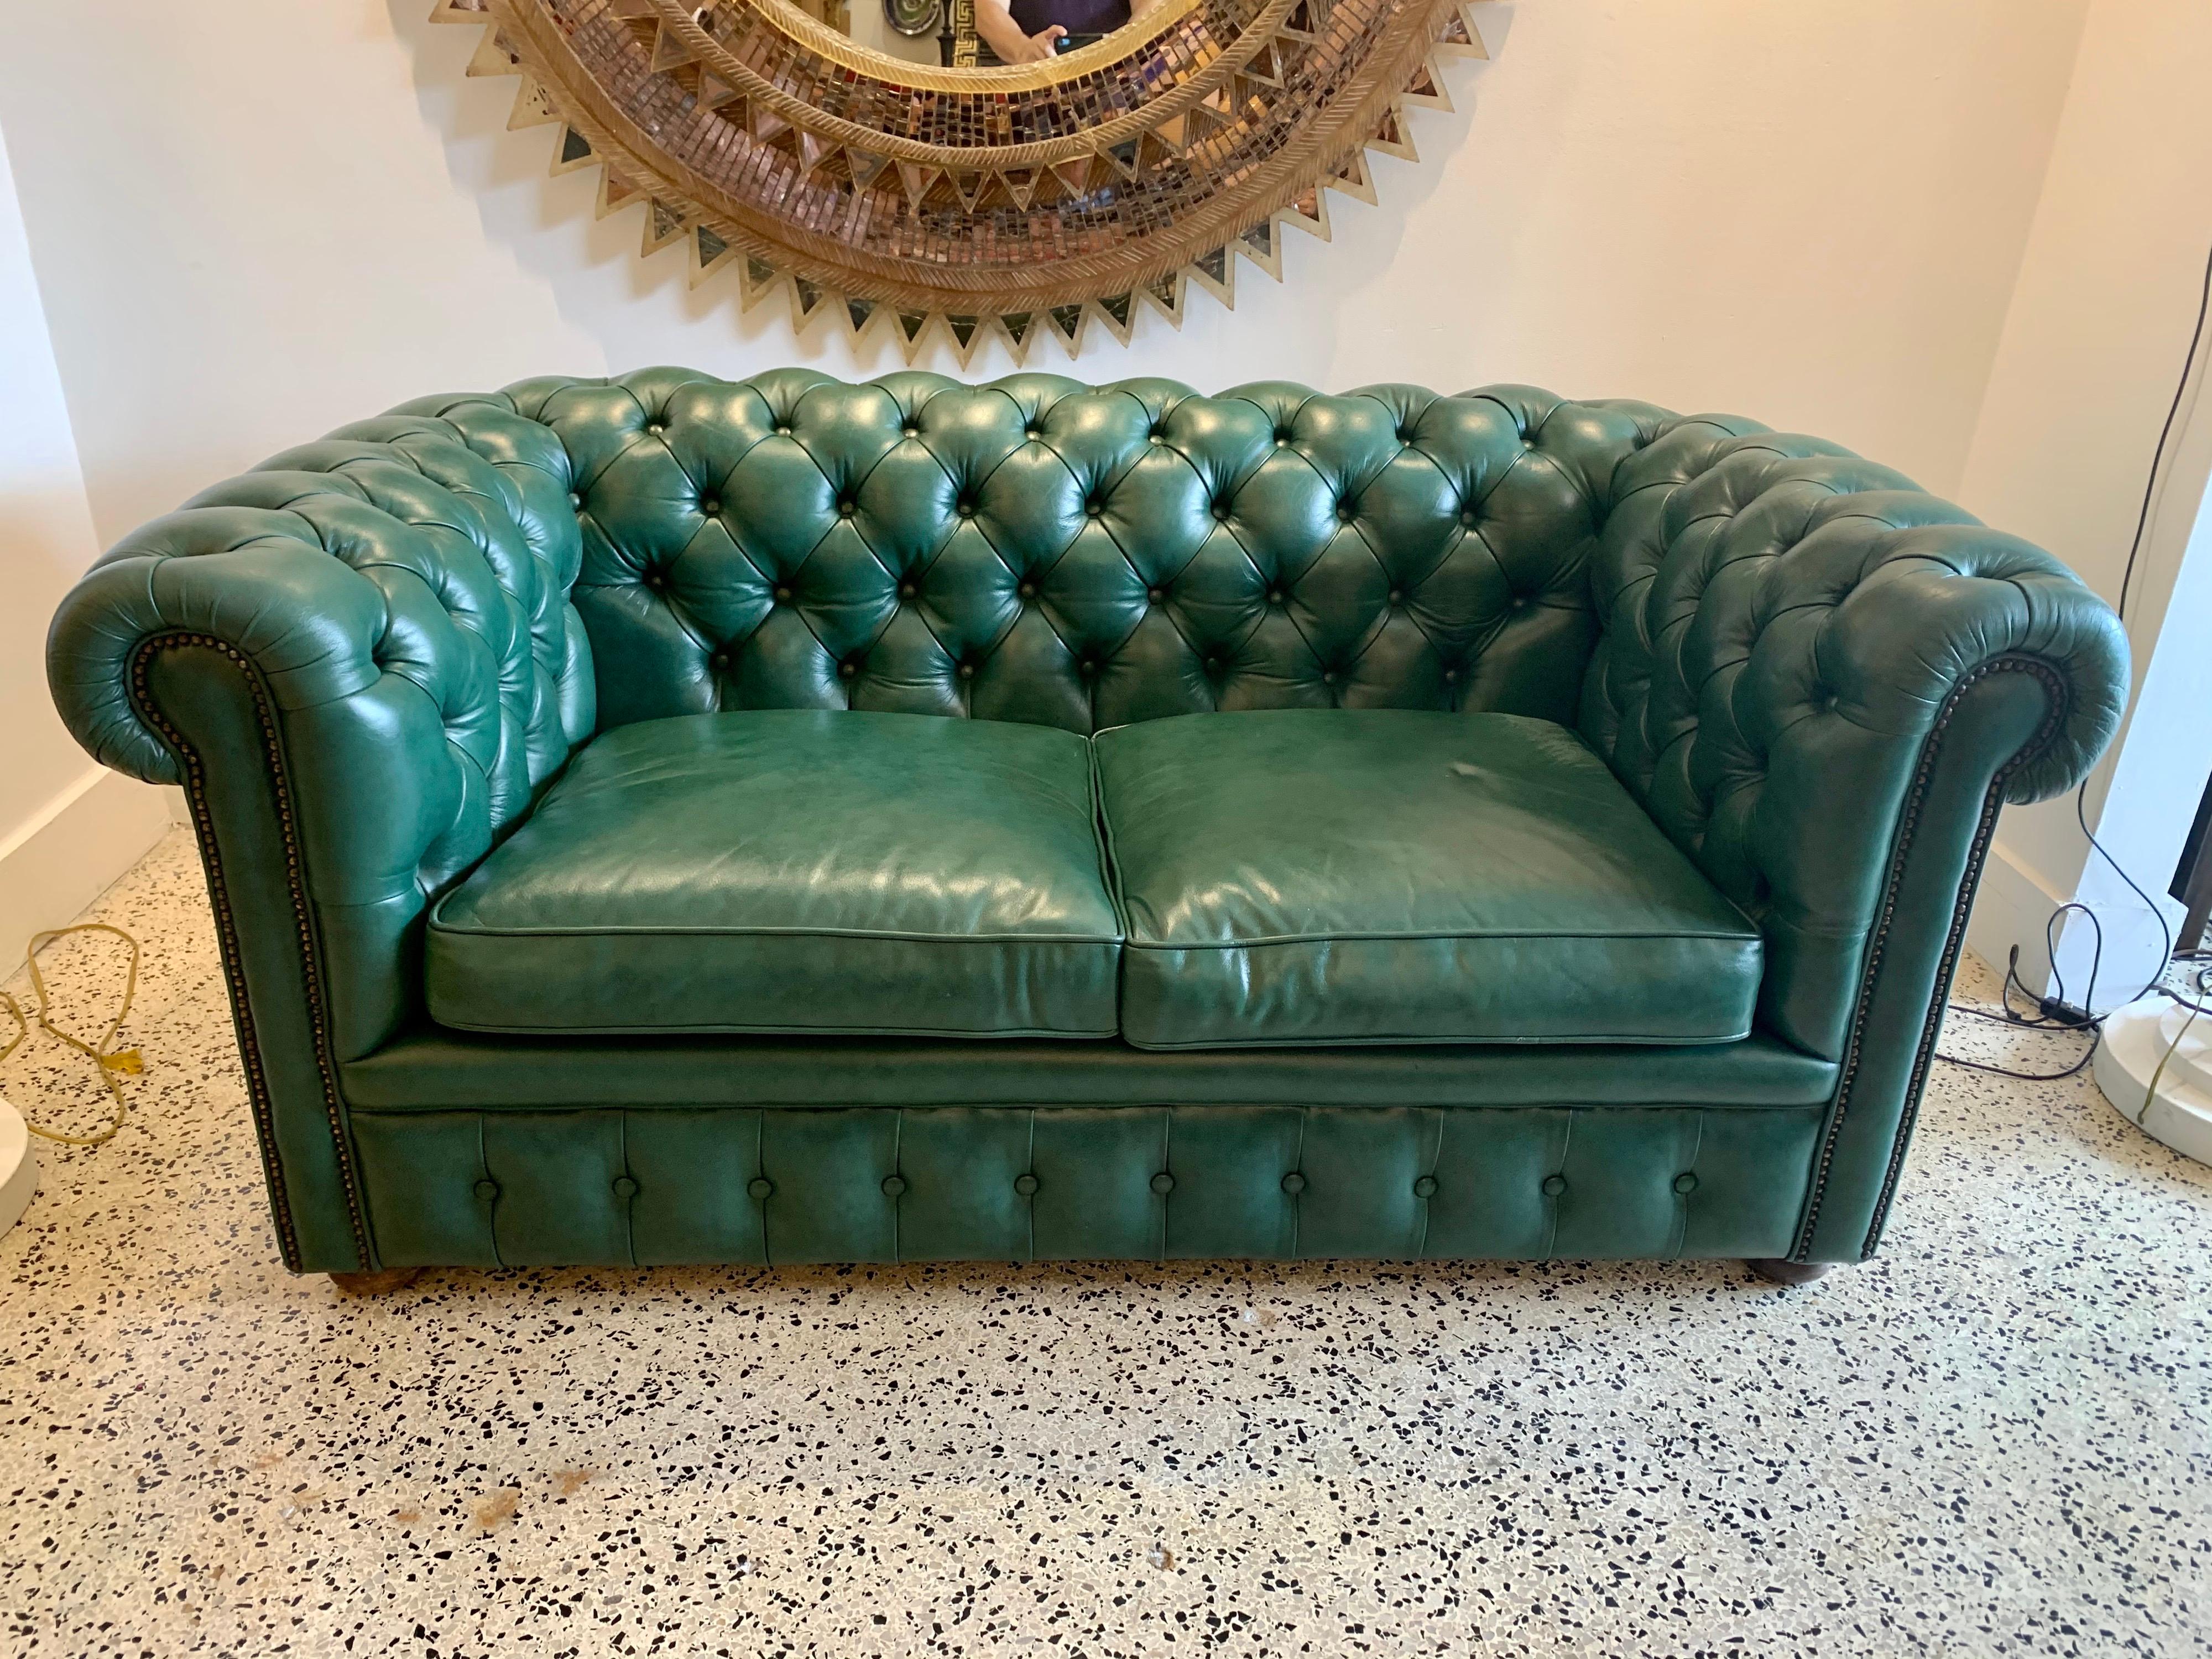 Original English Hunter Green Chesterfield Leather Two-Seat Sofa 6